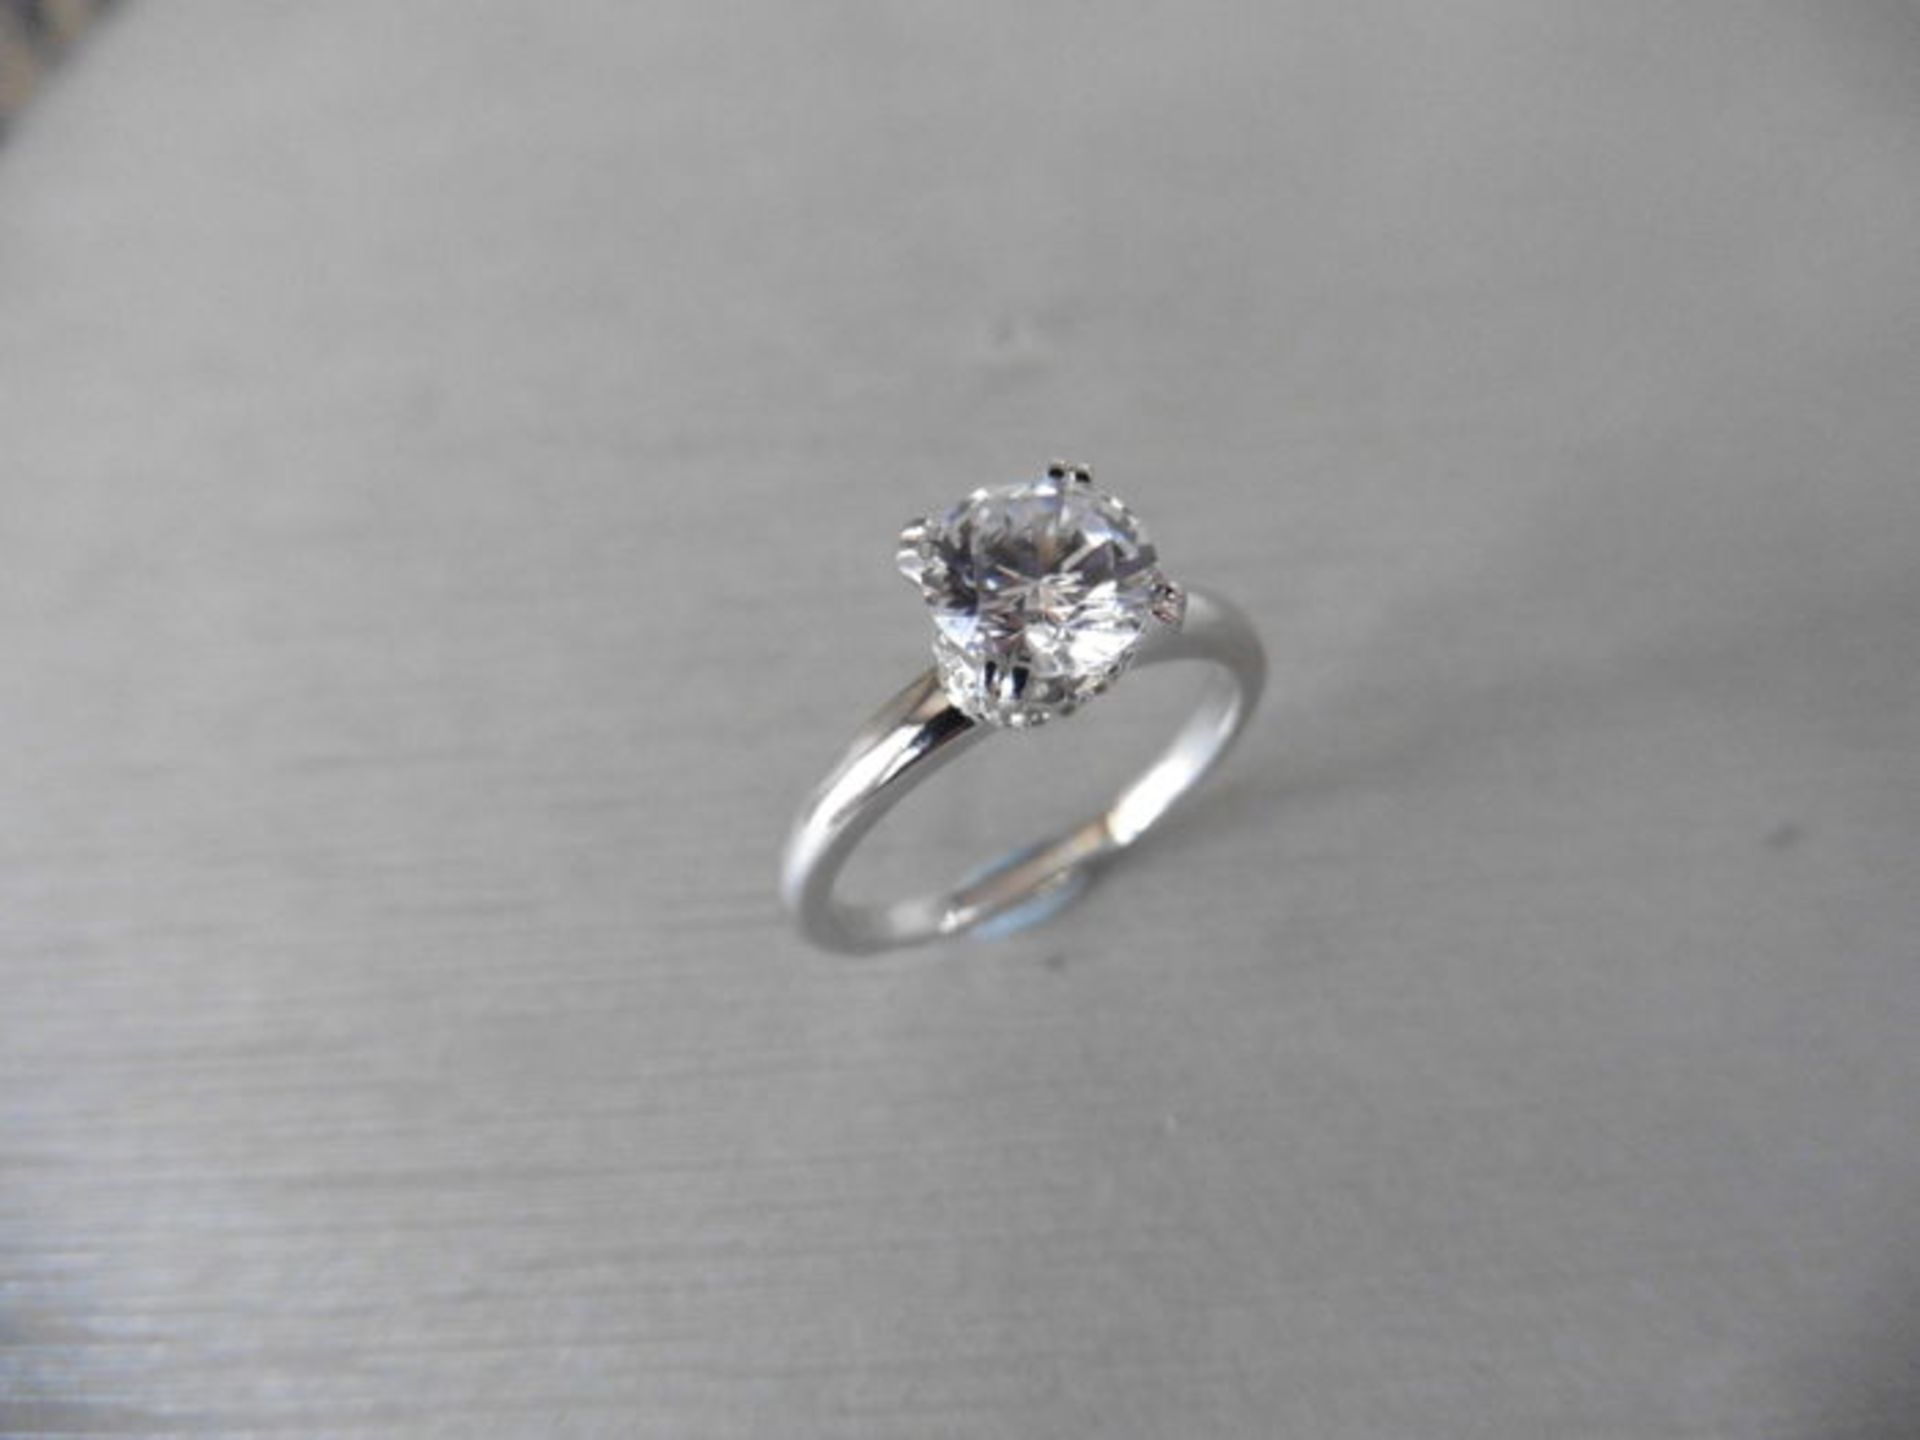 0.70ct diamond solitaire ring set in platinum. I colour, I1 clarity. 4 claw setting with diamond set